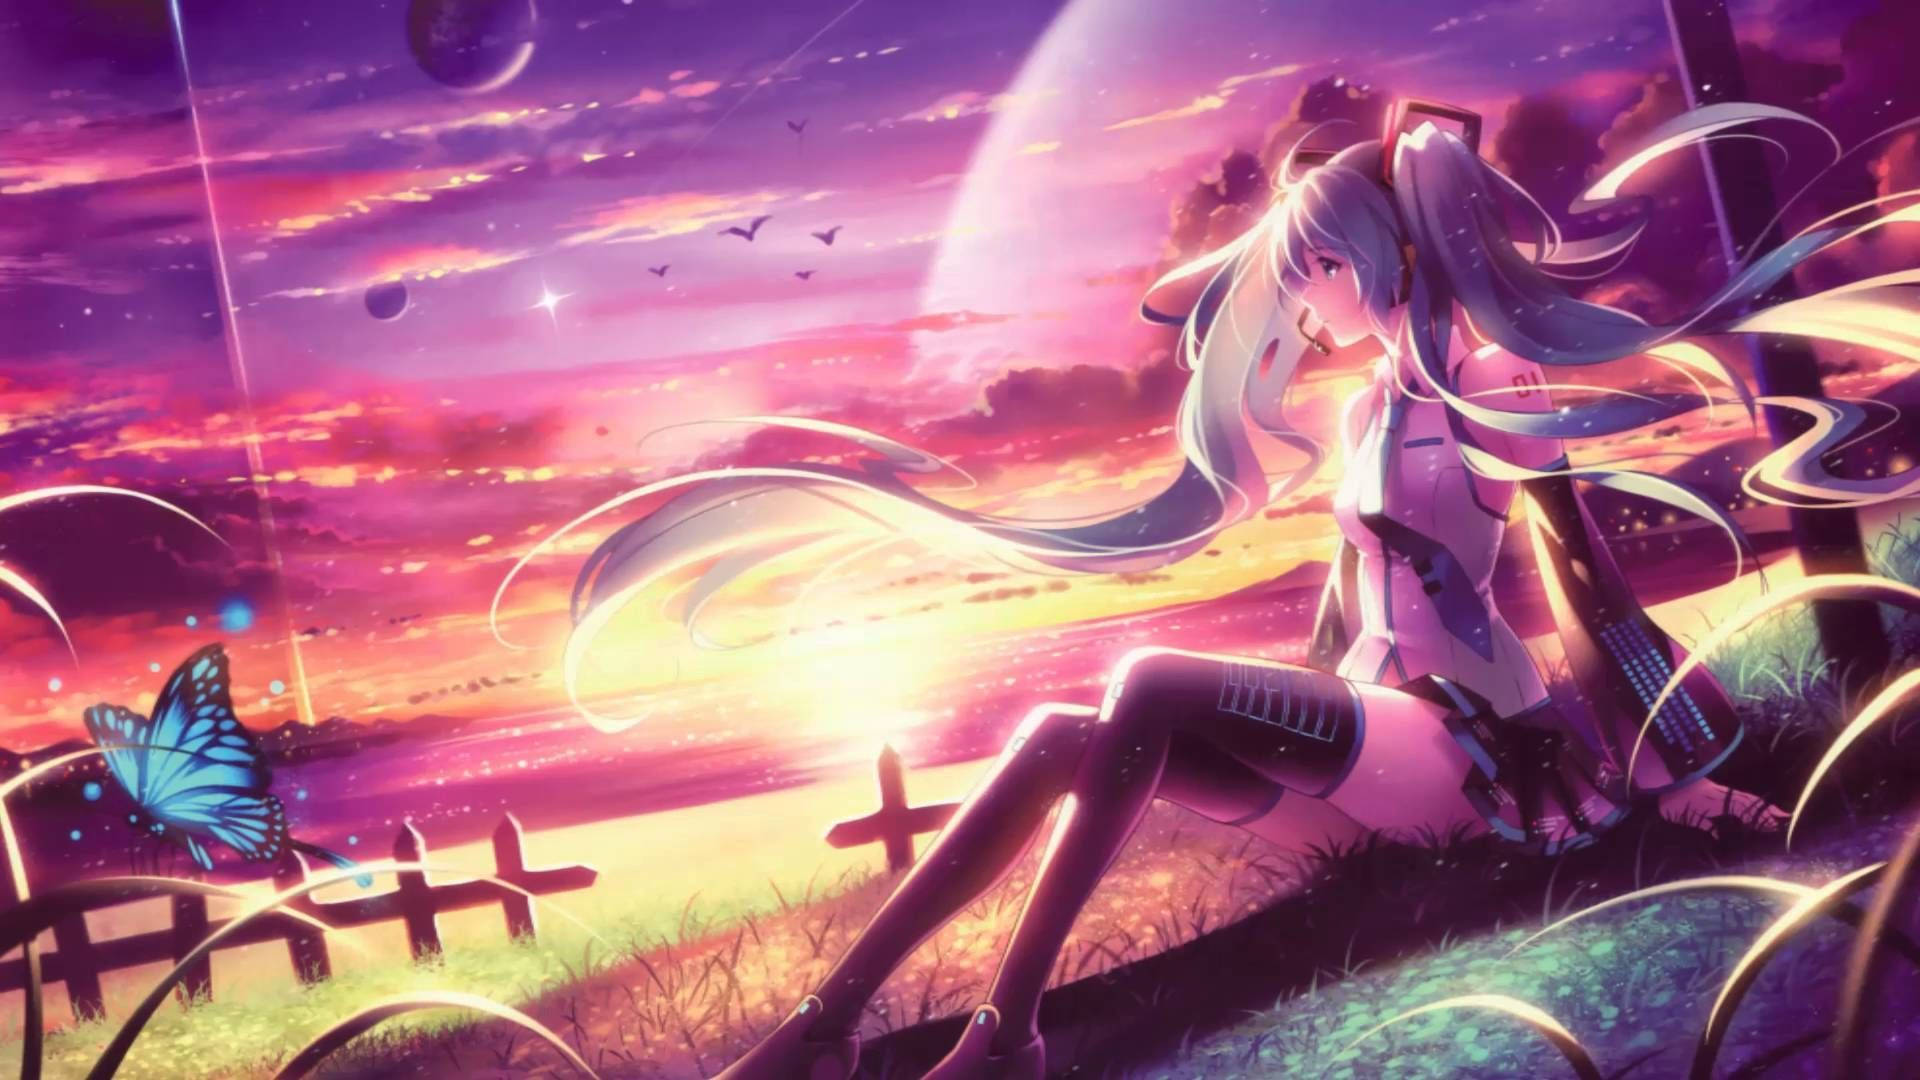 Pigtail Anime Girl Nightcore Background